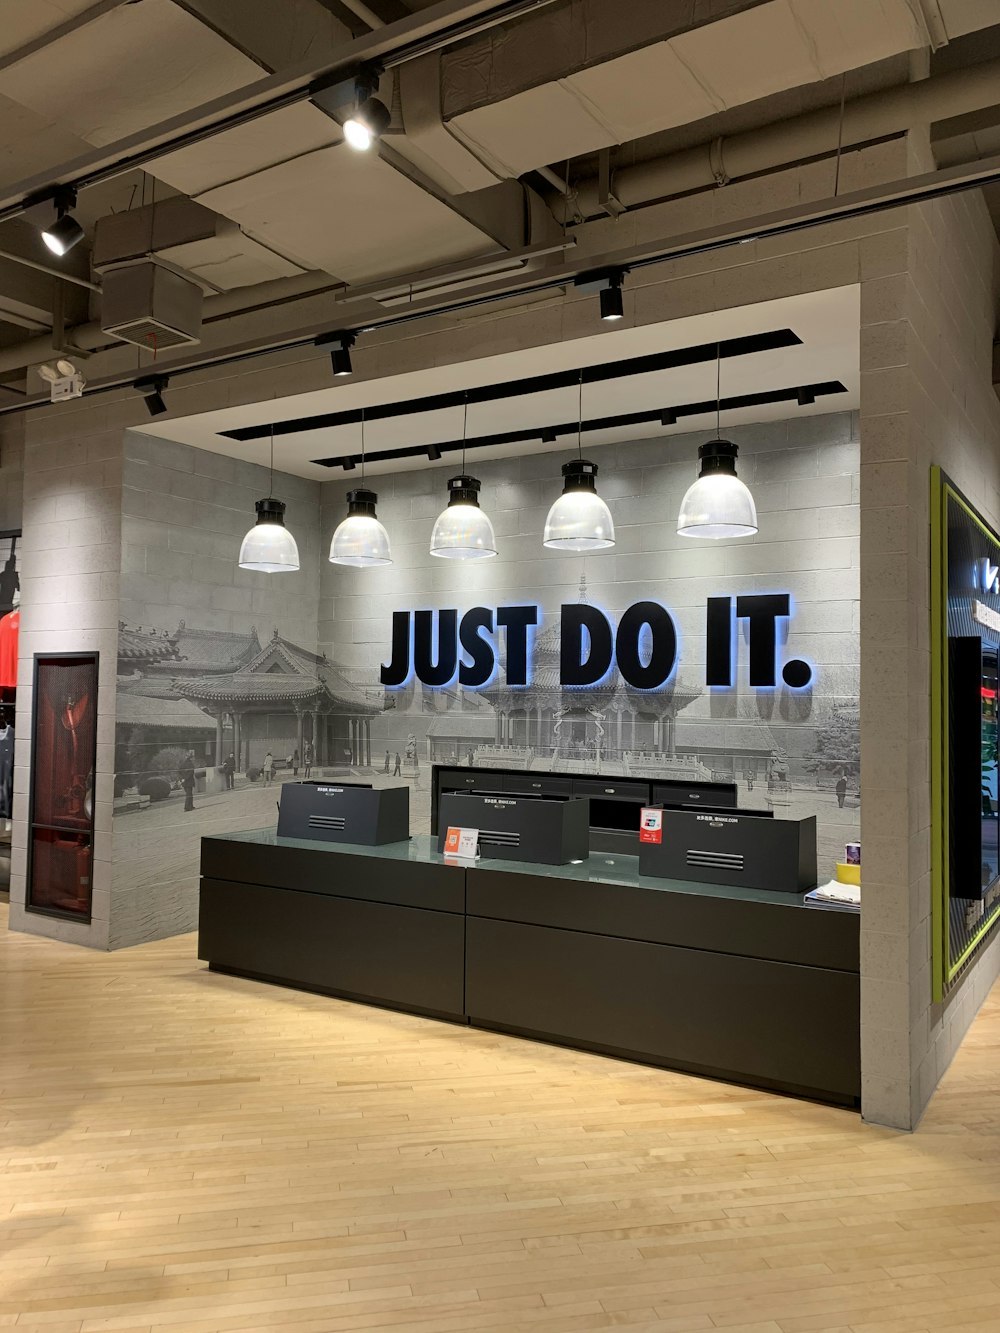 Nike store with Just Do It. signage